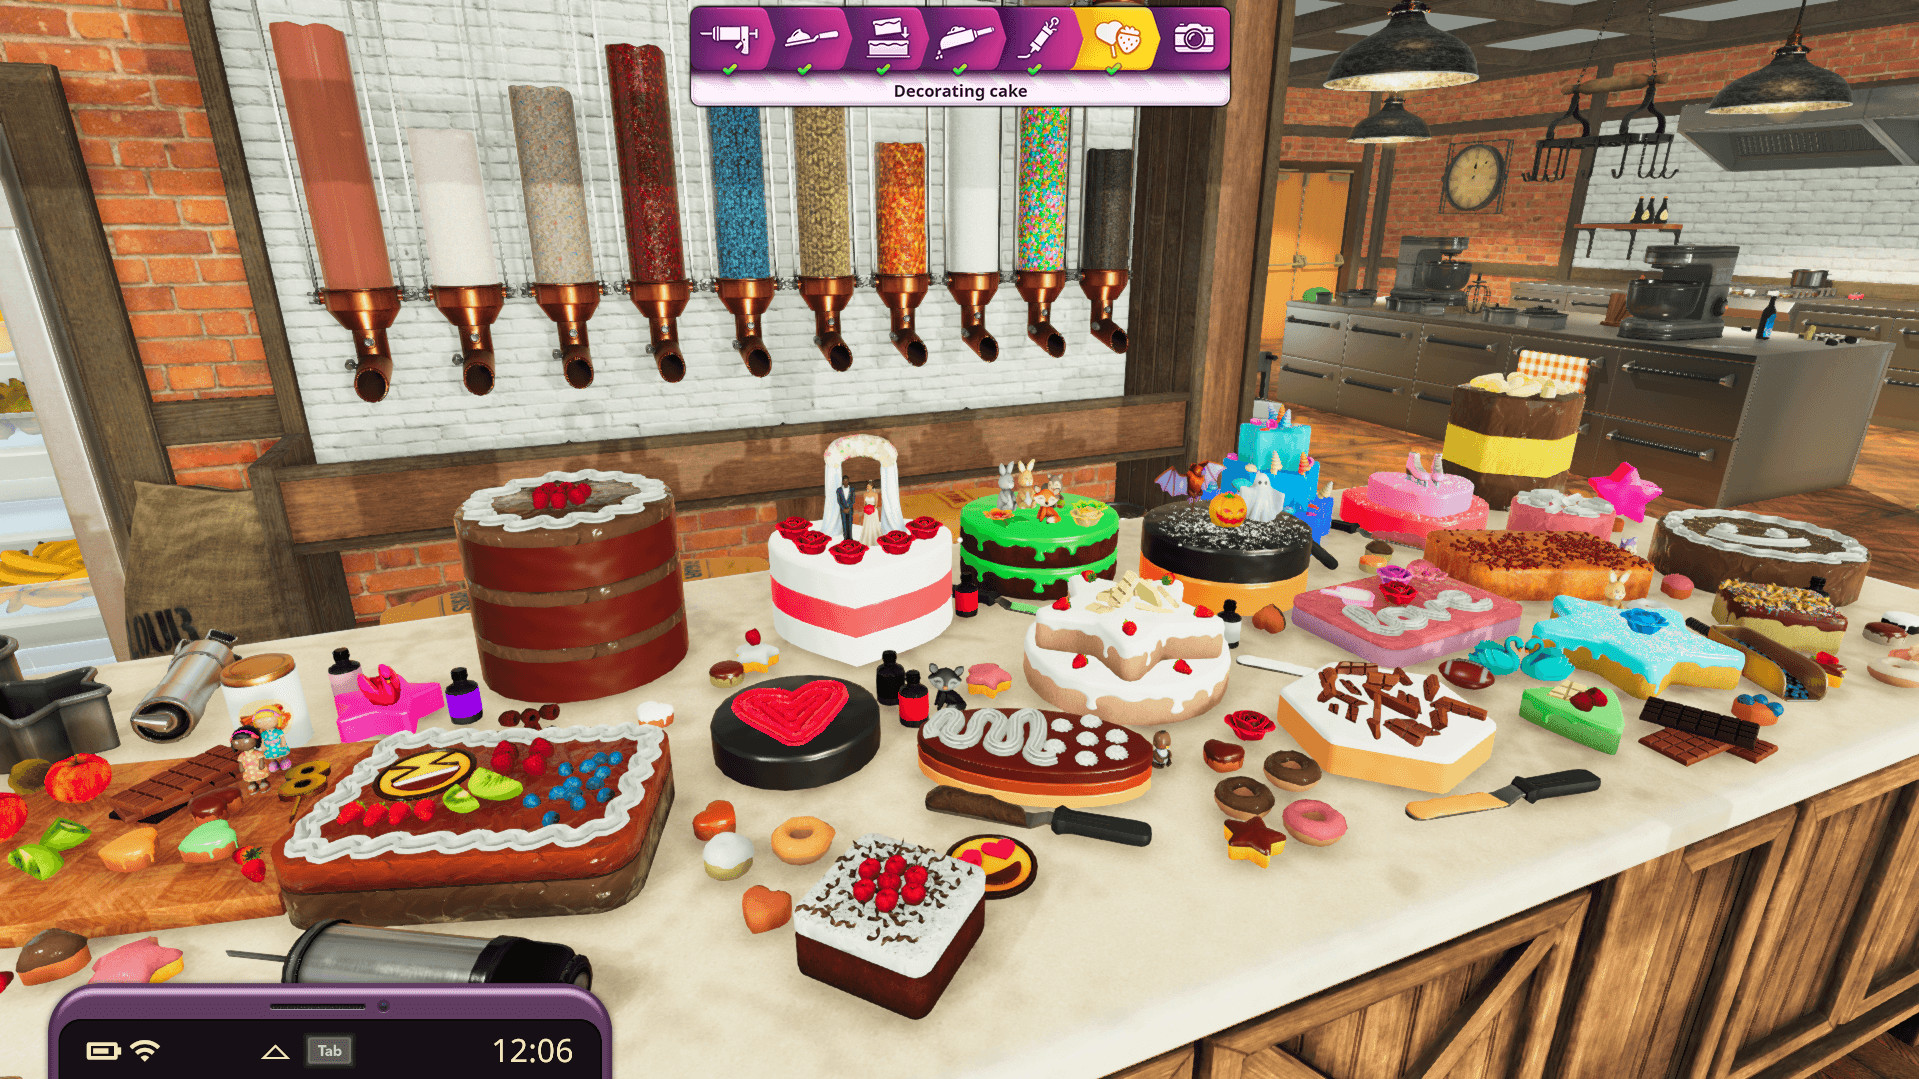 Cooking Simulator - Cakes and Cookies Featured Screenshot #1